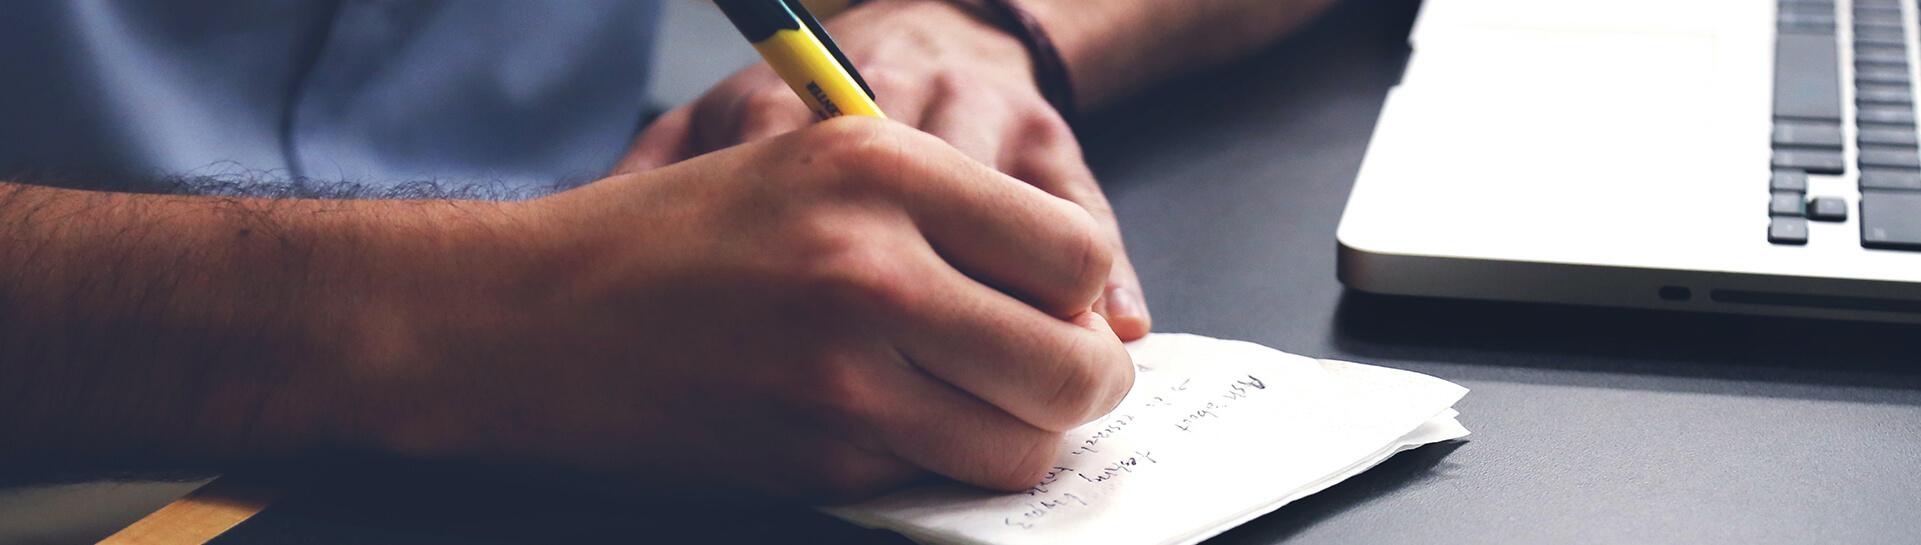 A person taking handwritten notes